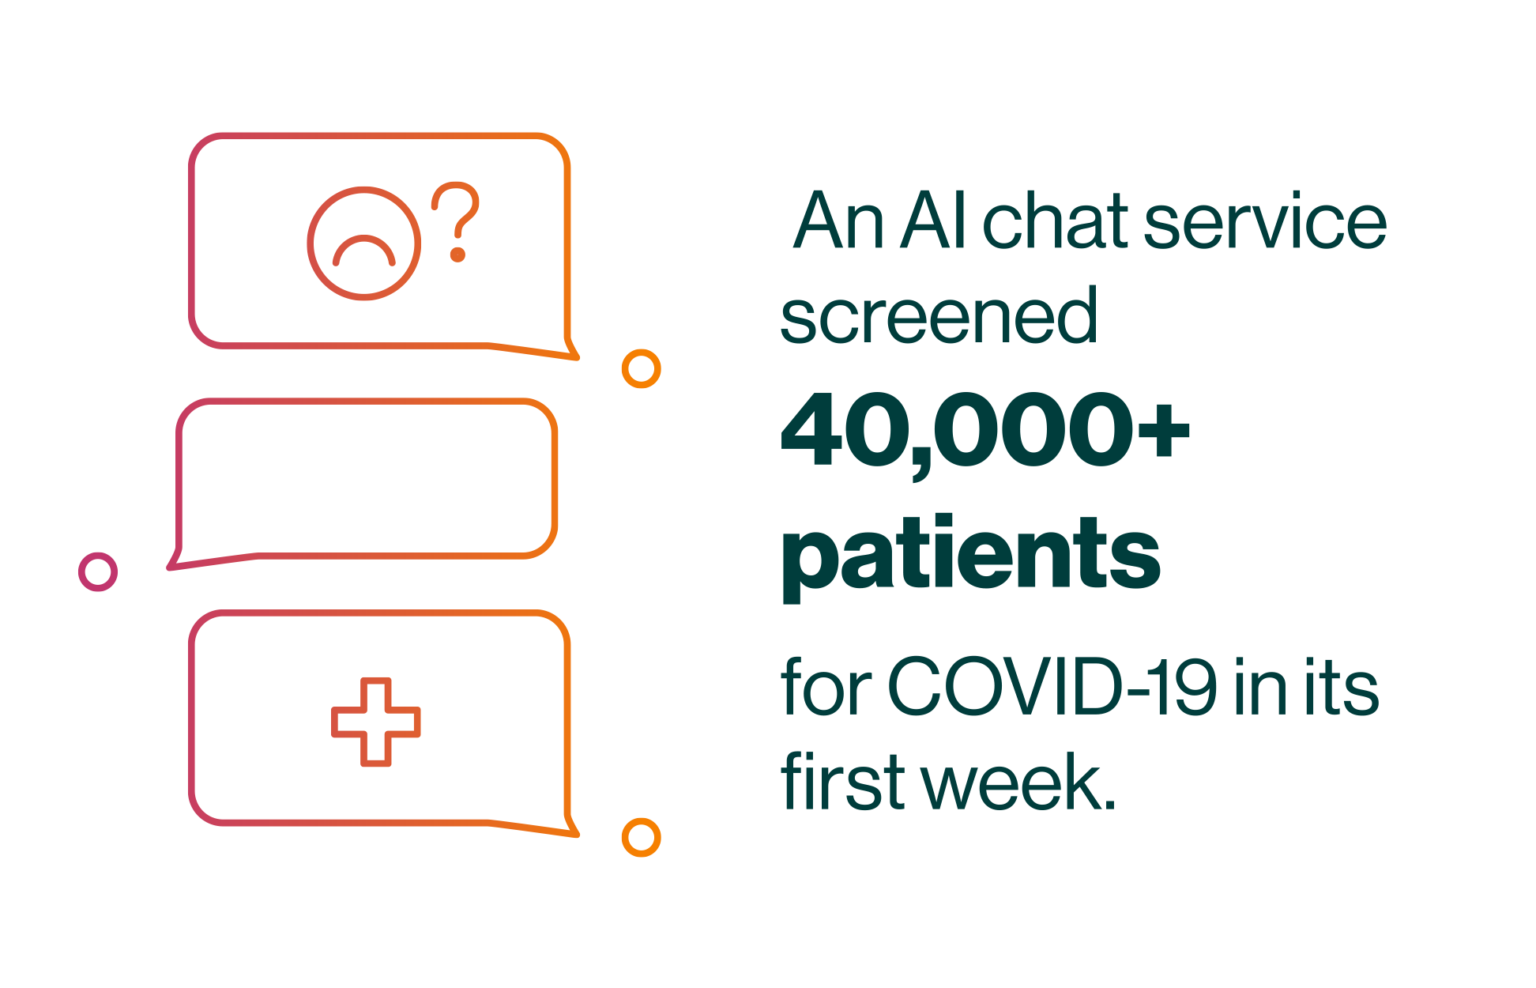 An AI chat service screened 40,000+ patients for COVID-19 in its first week